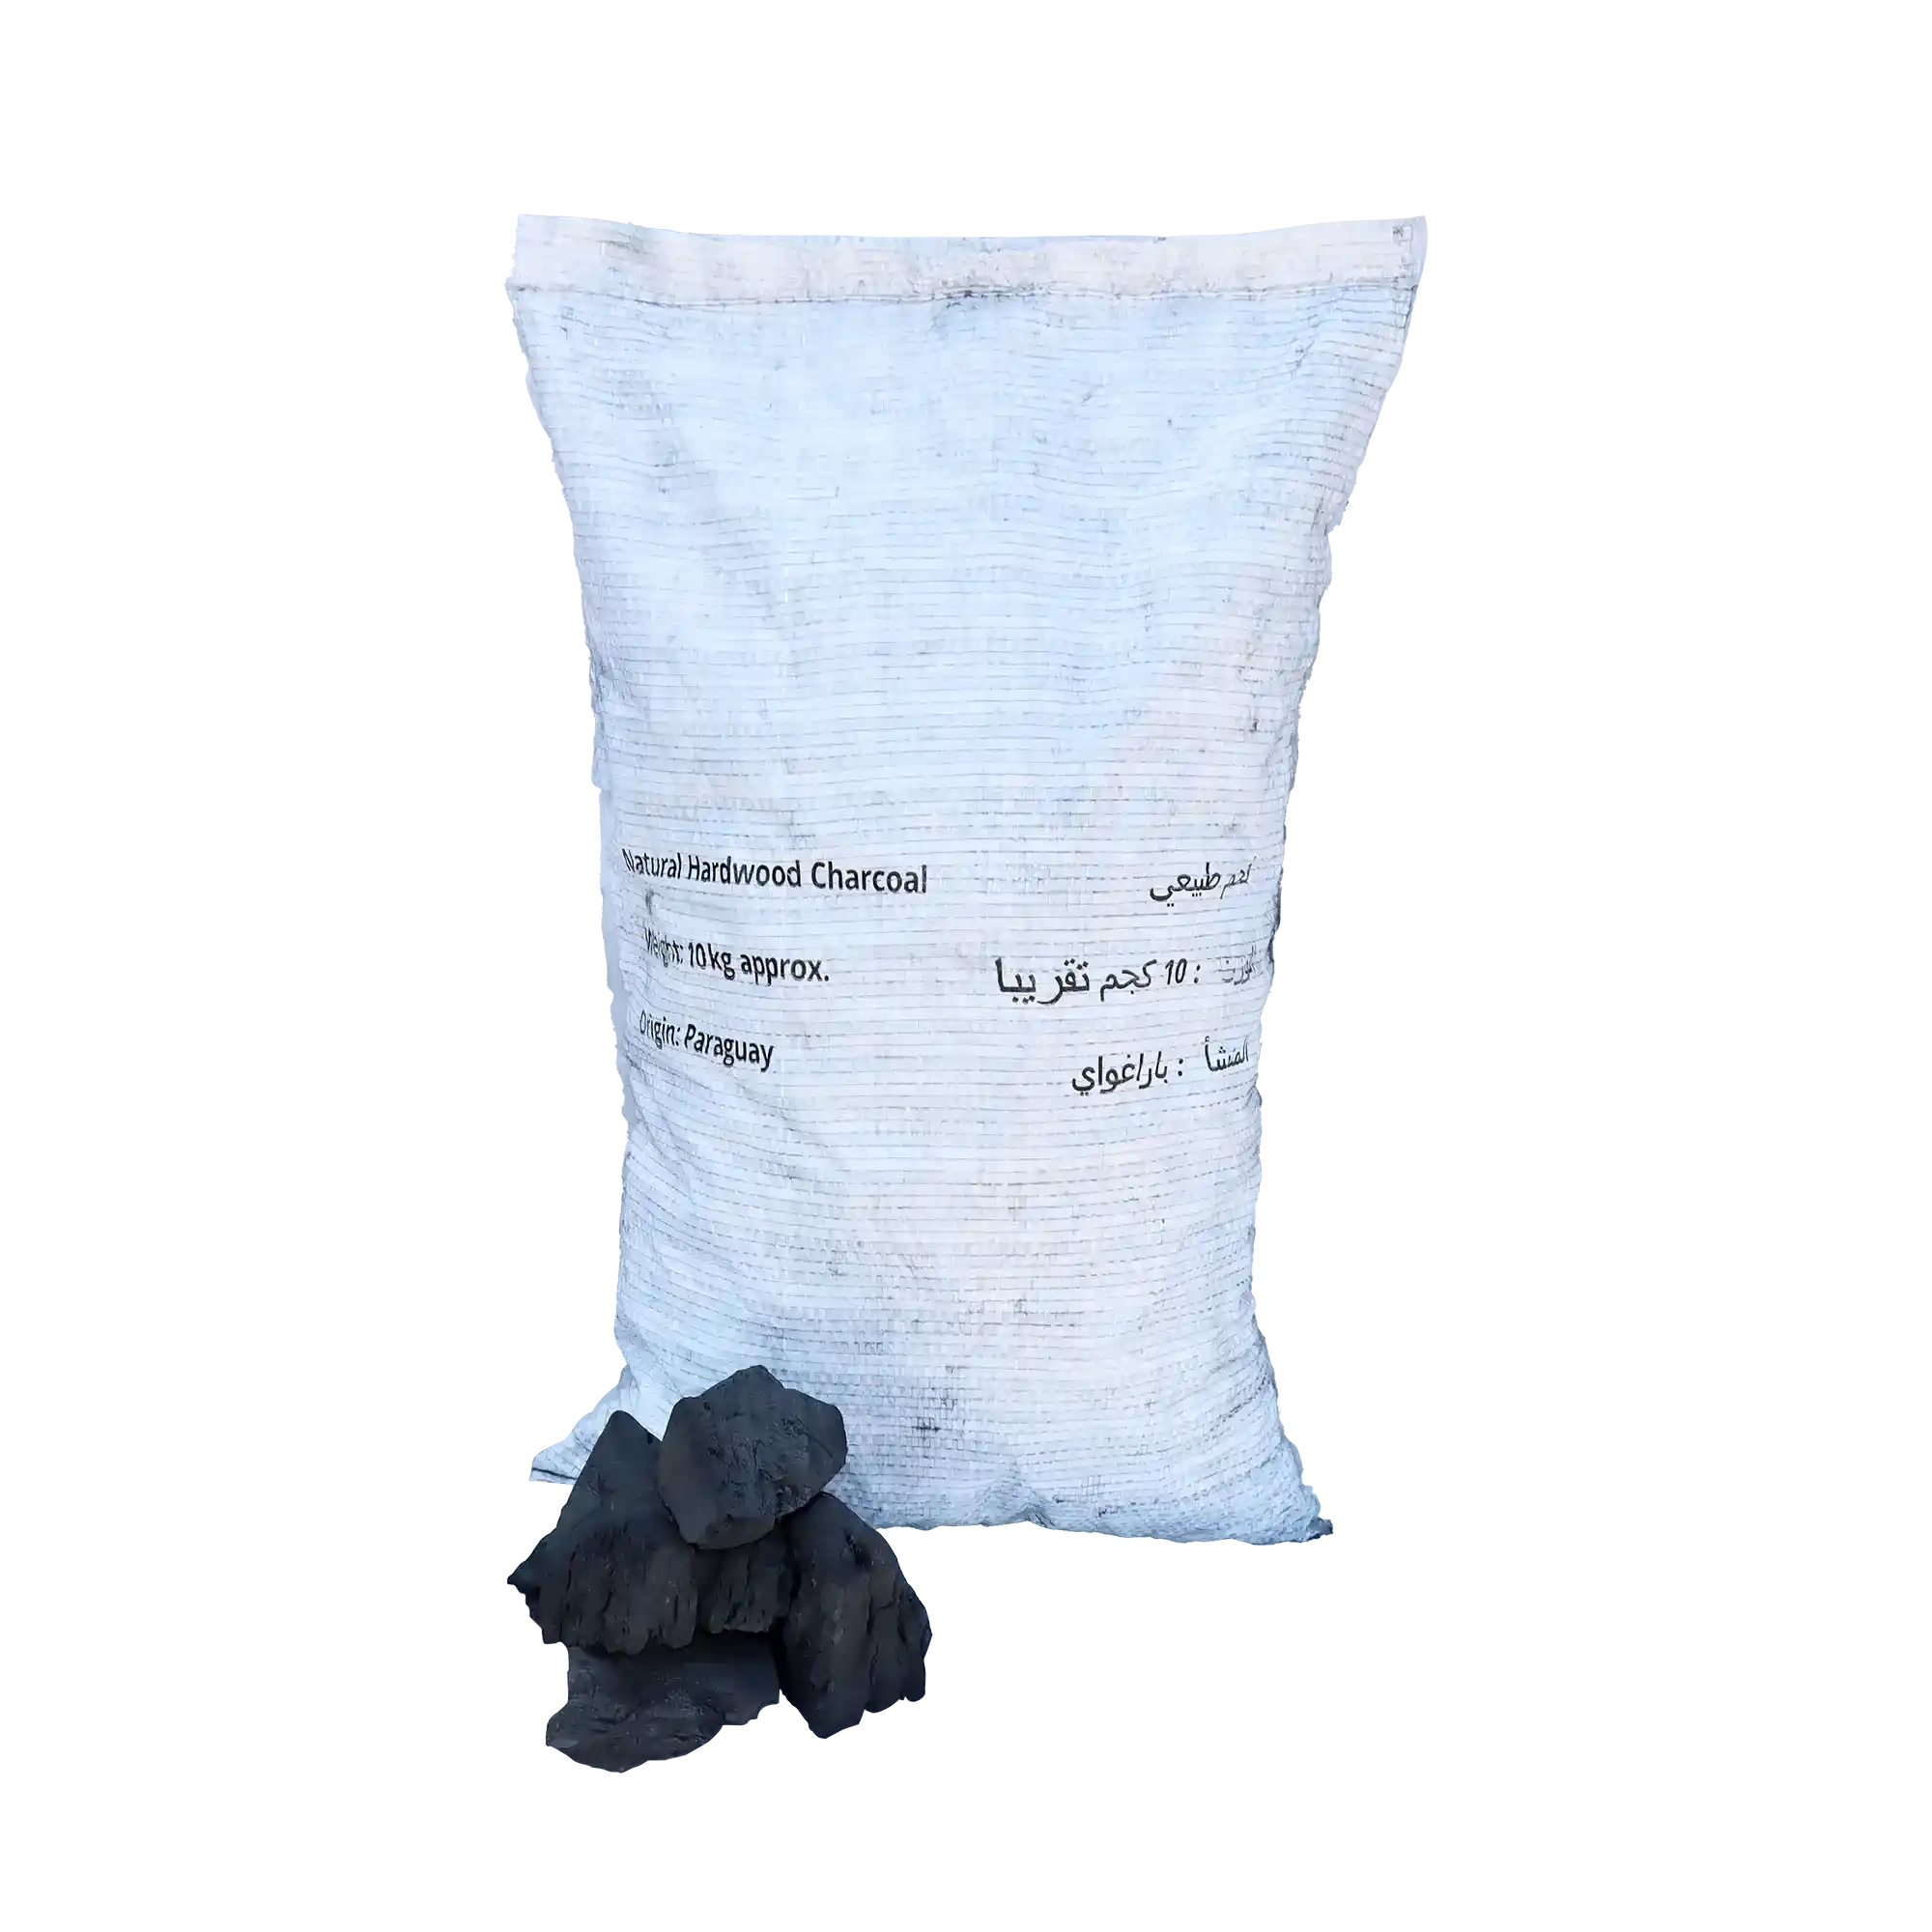 KAC -Paraguay charcoal (grilled) - 10 kg